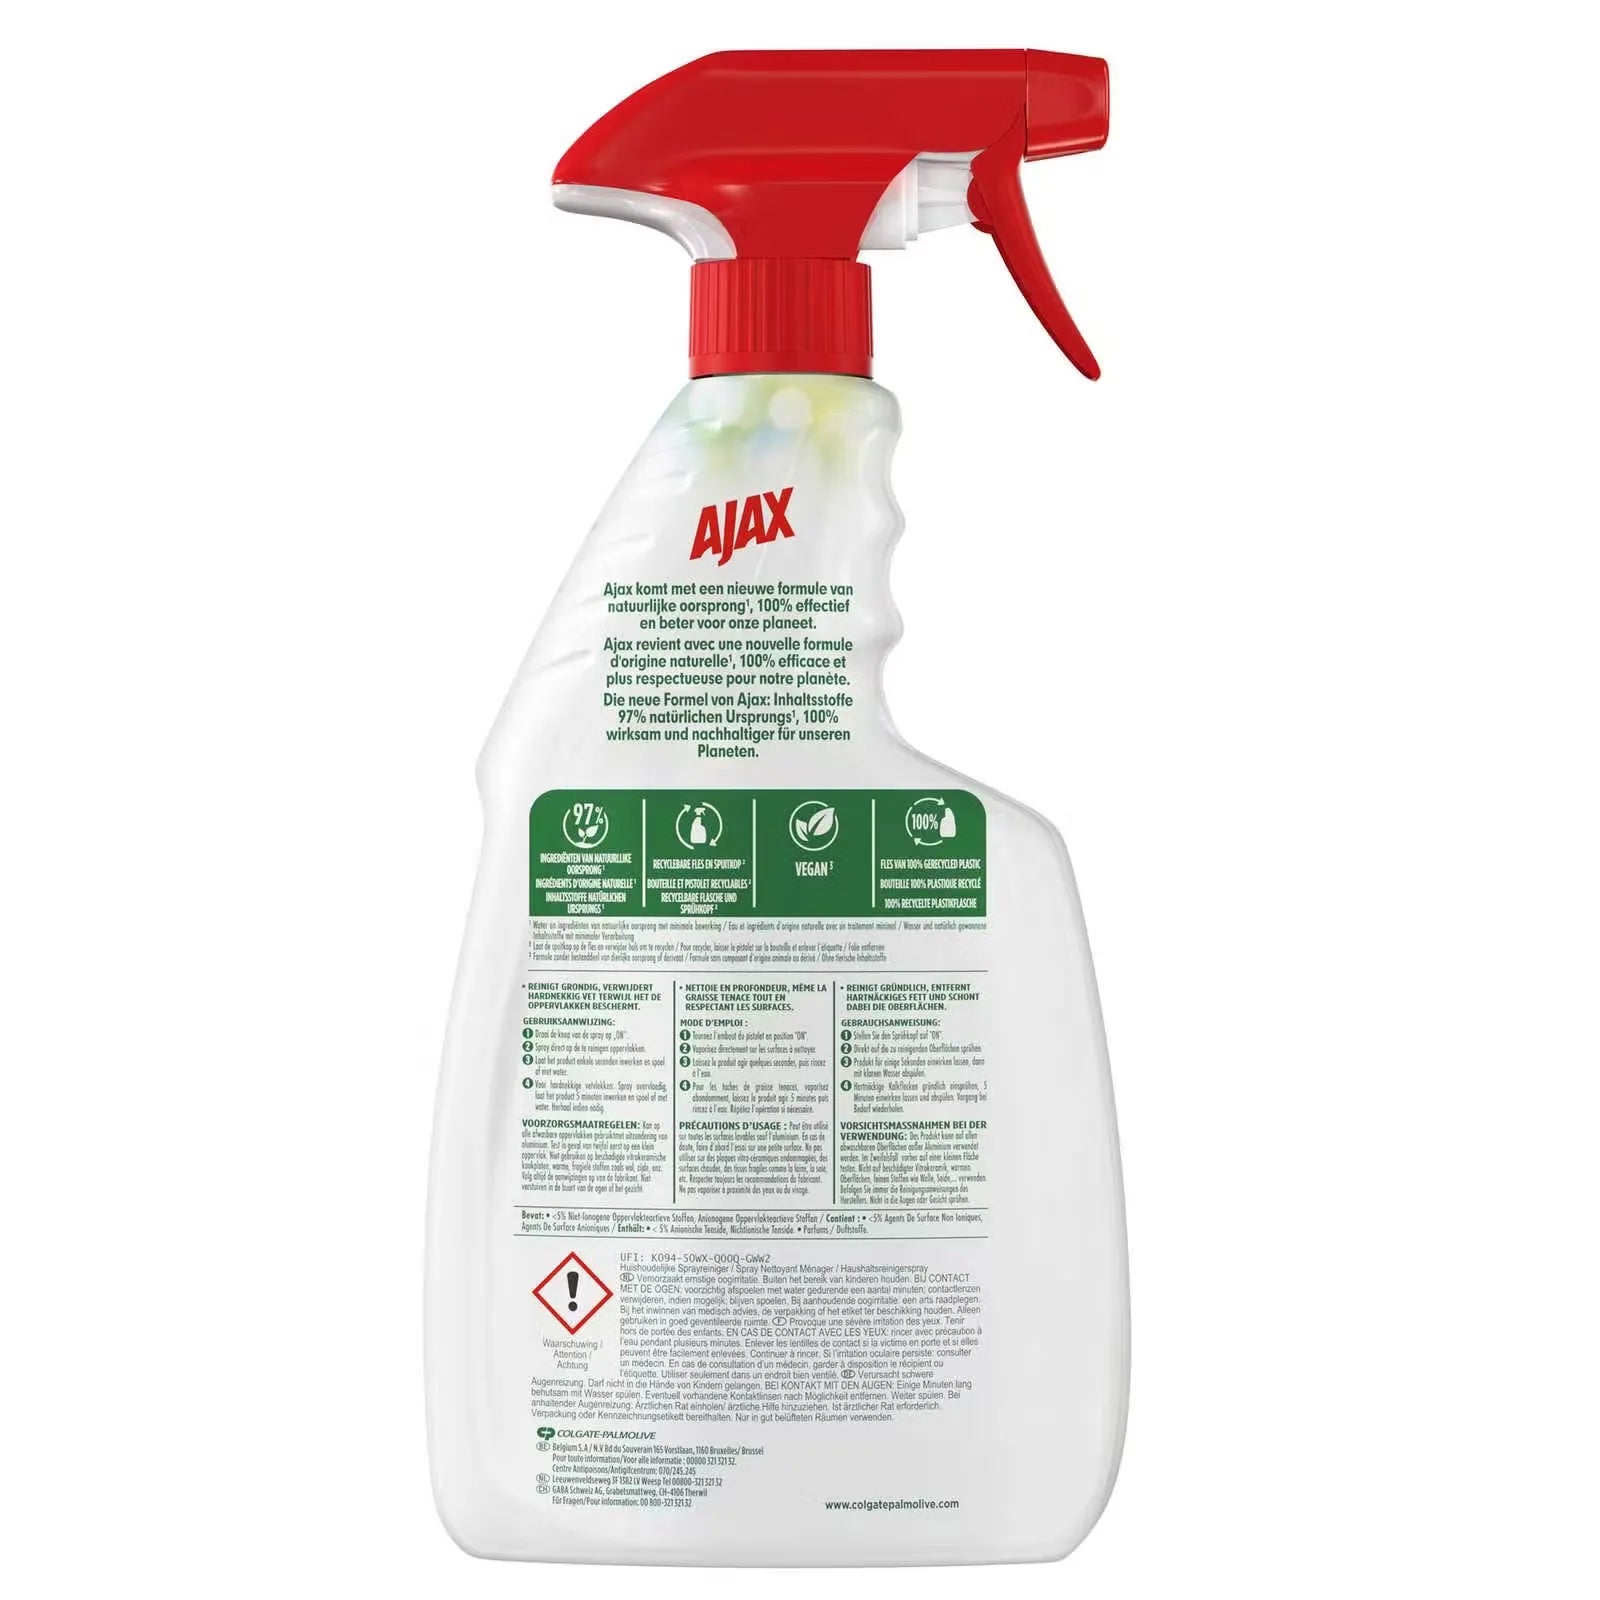 Blue Ajax Multi-Surface Cleaner bottle with 500ml capacity, highlighting its antibacterial formula and bleach-free nature.